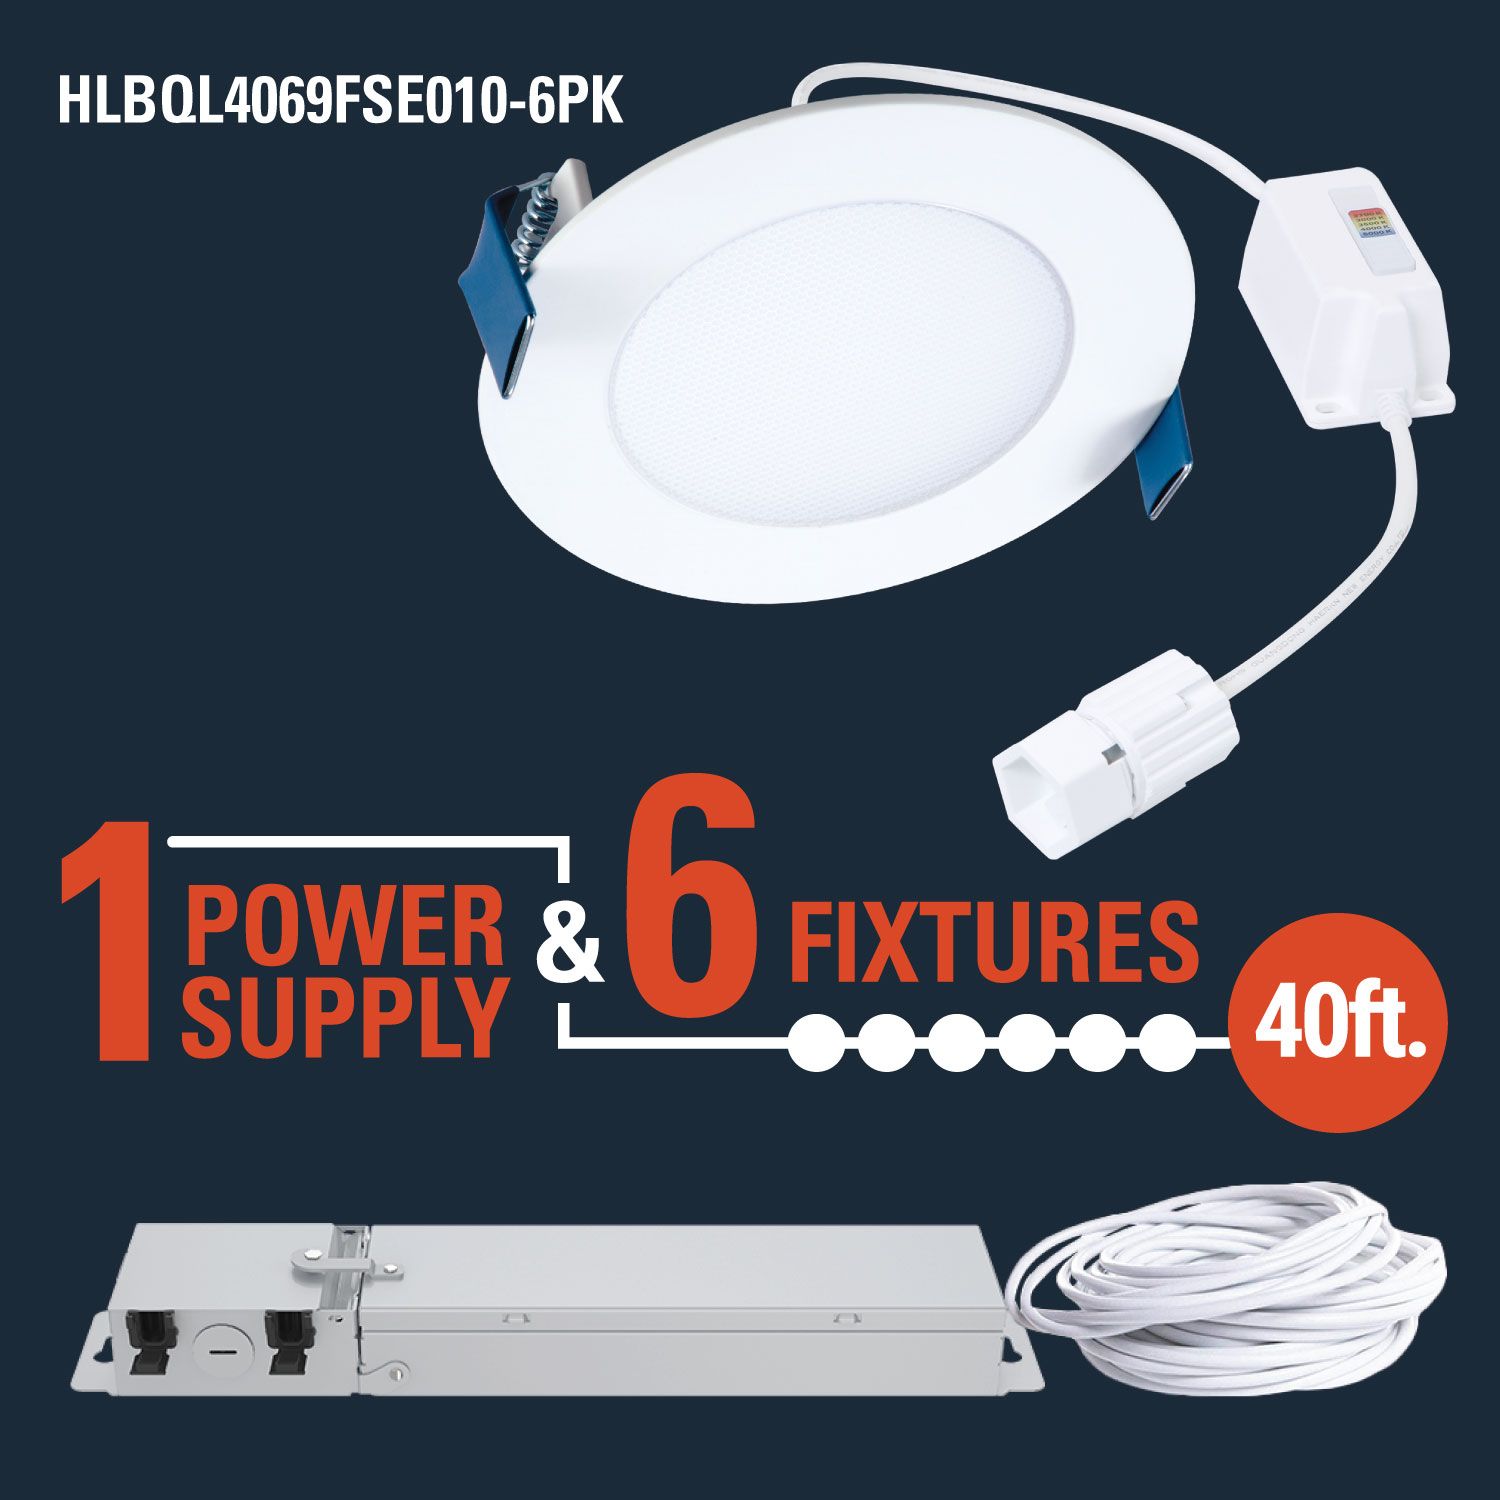 Halo HLB 4 Slim Edge Canless 10W LED Downlight CCT, Dimmable, 600 Lumens